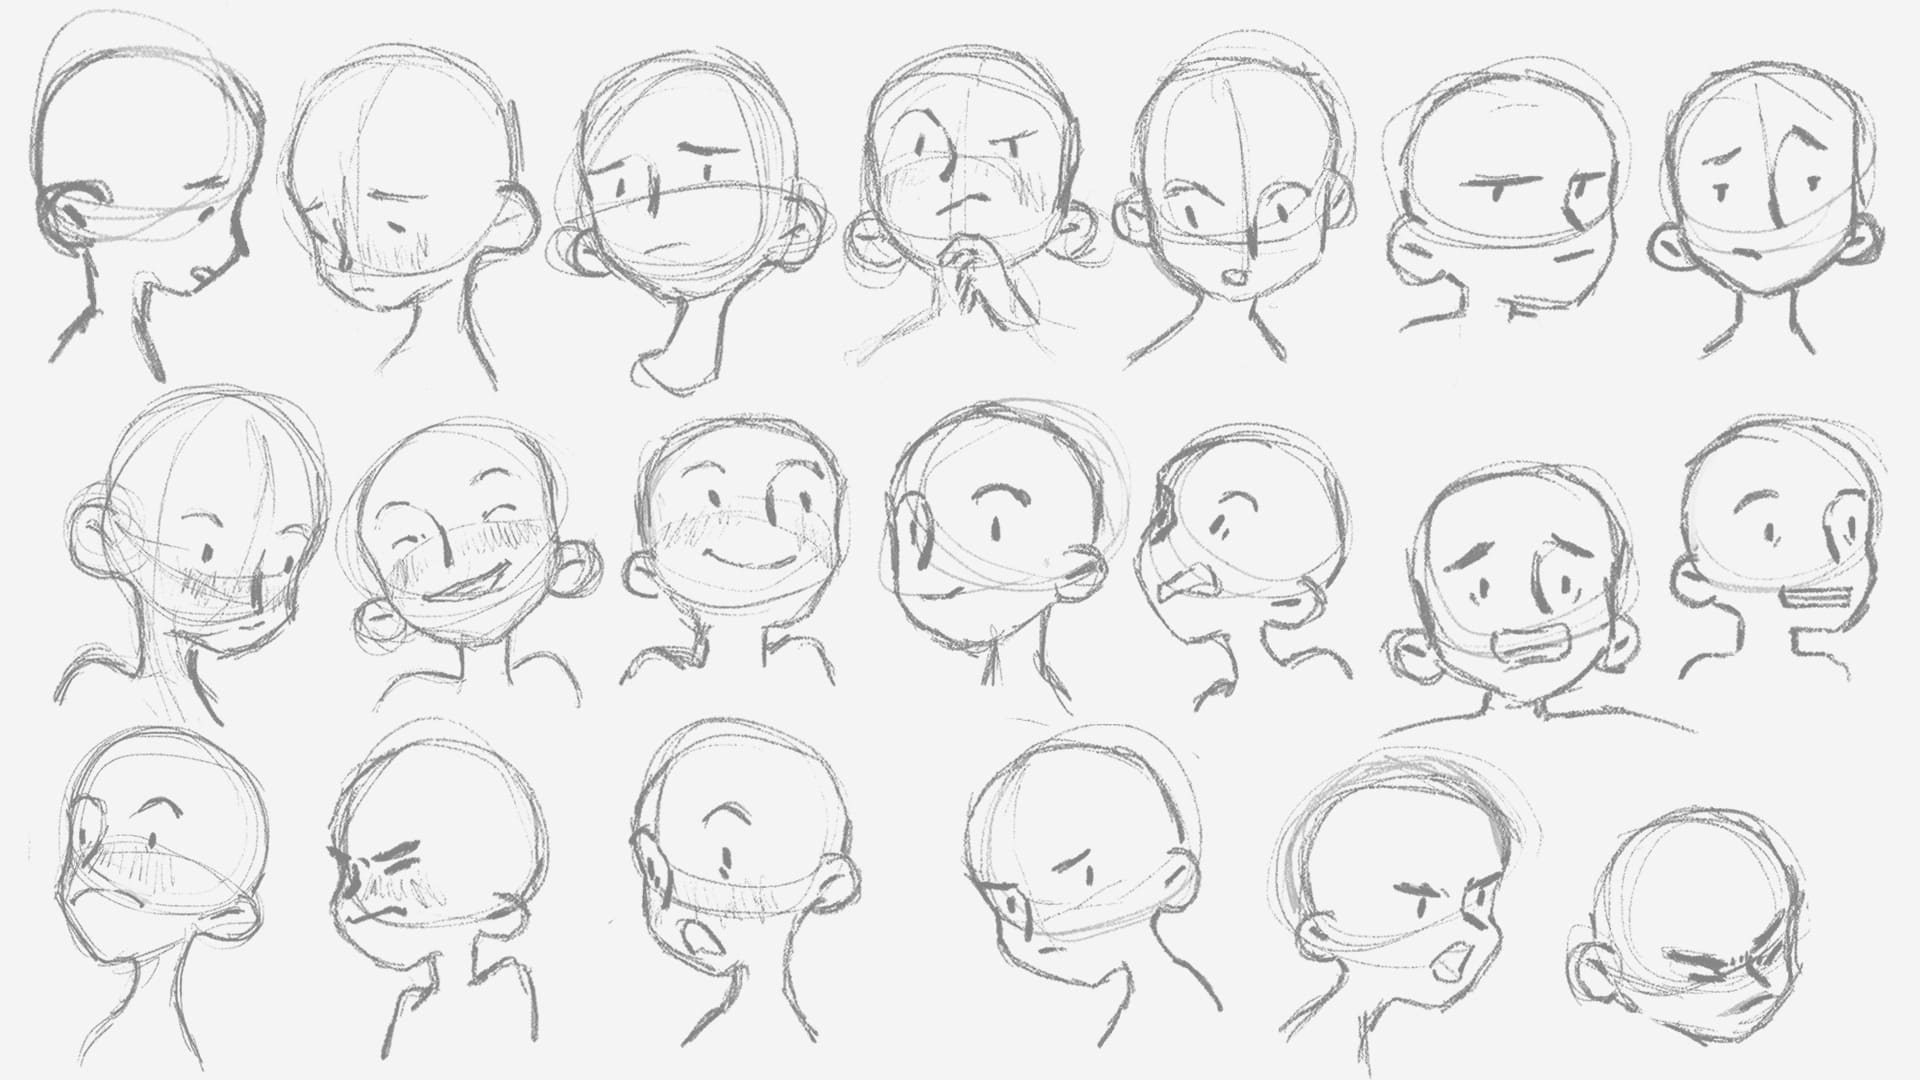 Sketches of the facial expressions of the main character without attire, hair, or color.